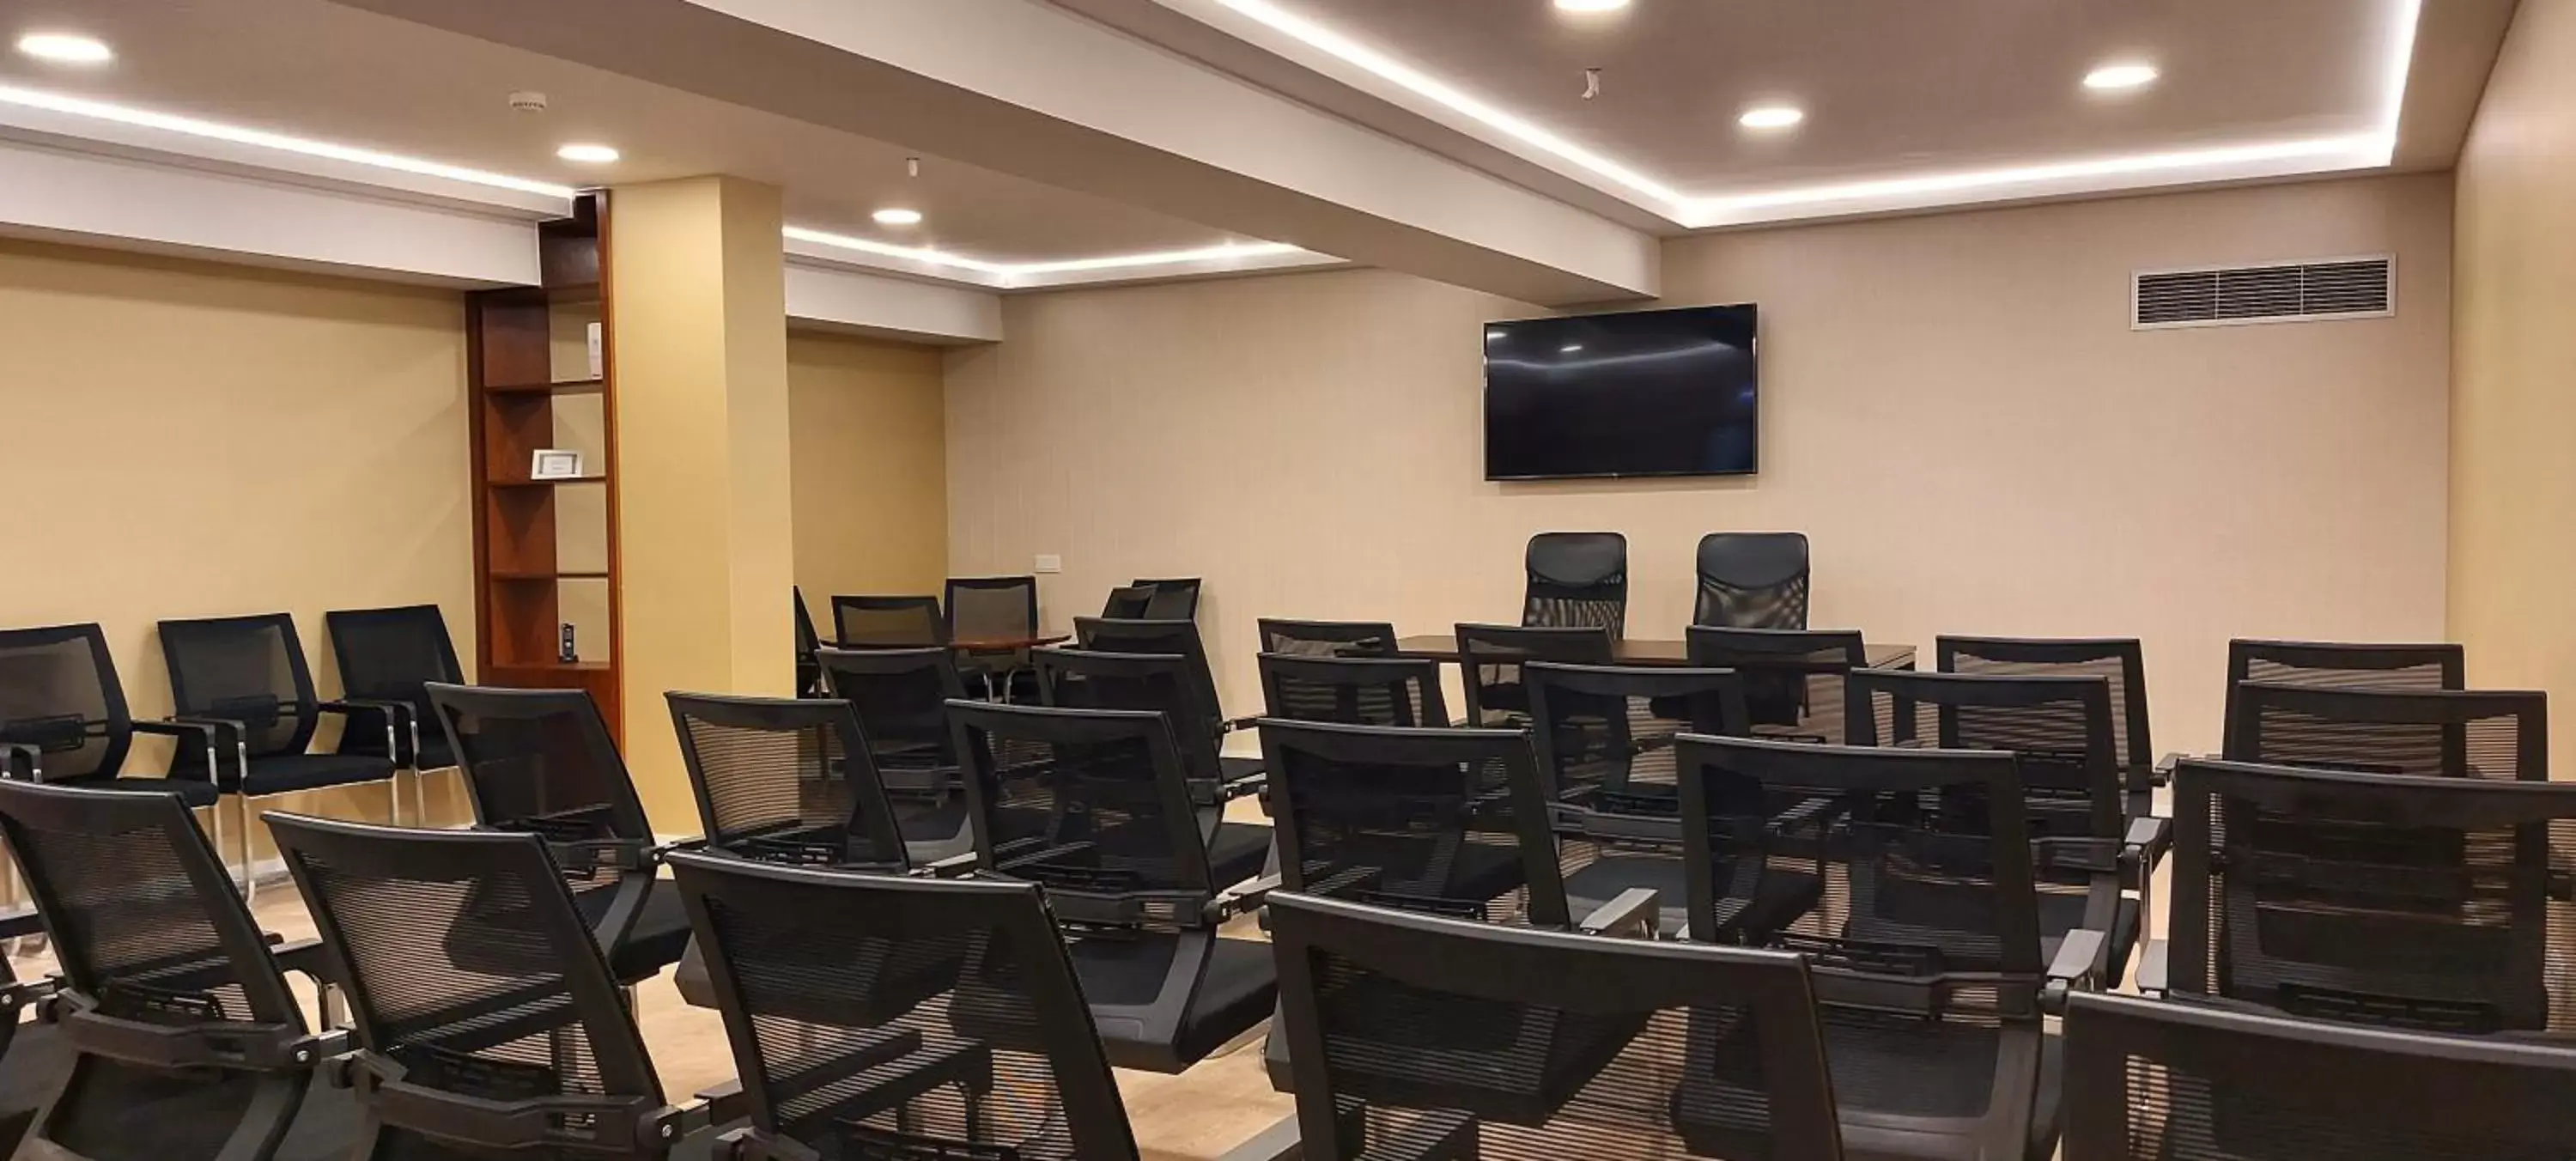 Meeting/conference room in Empire Lisbon Hotel